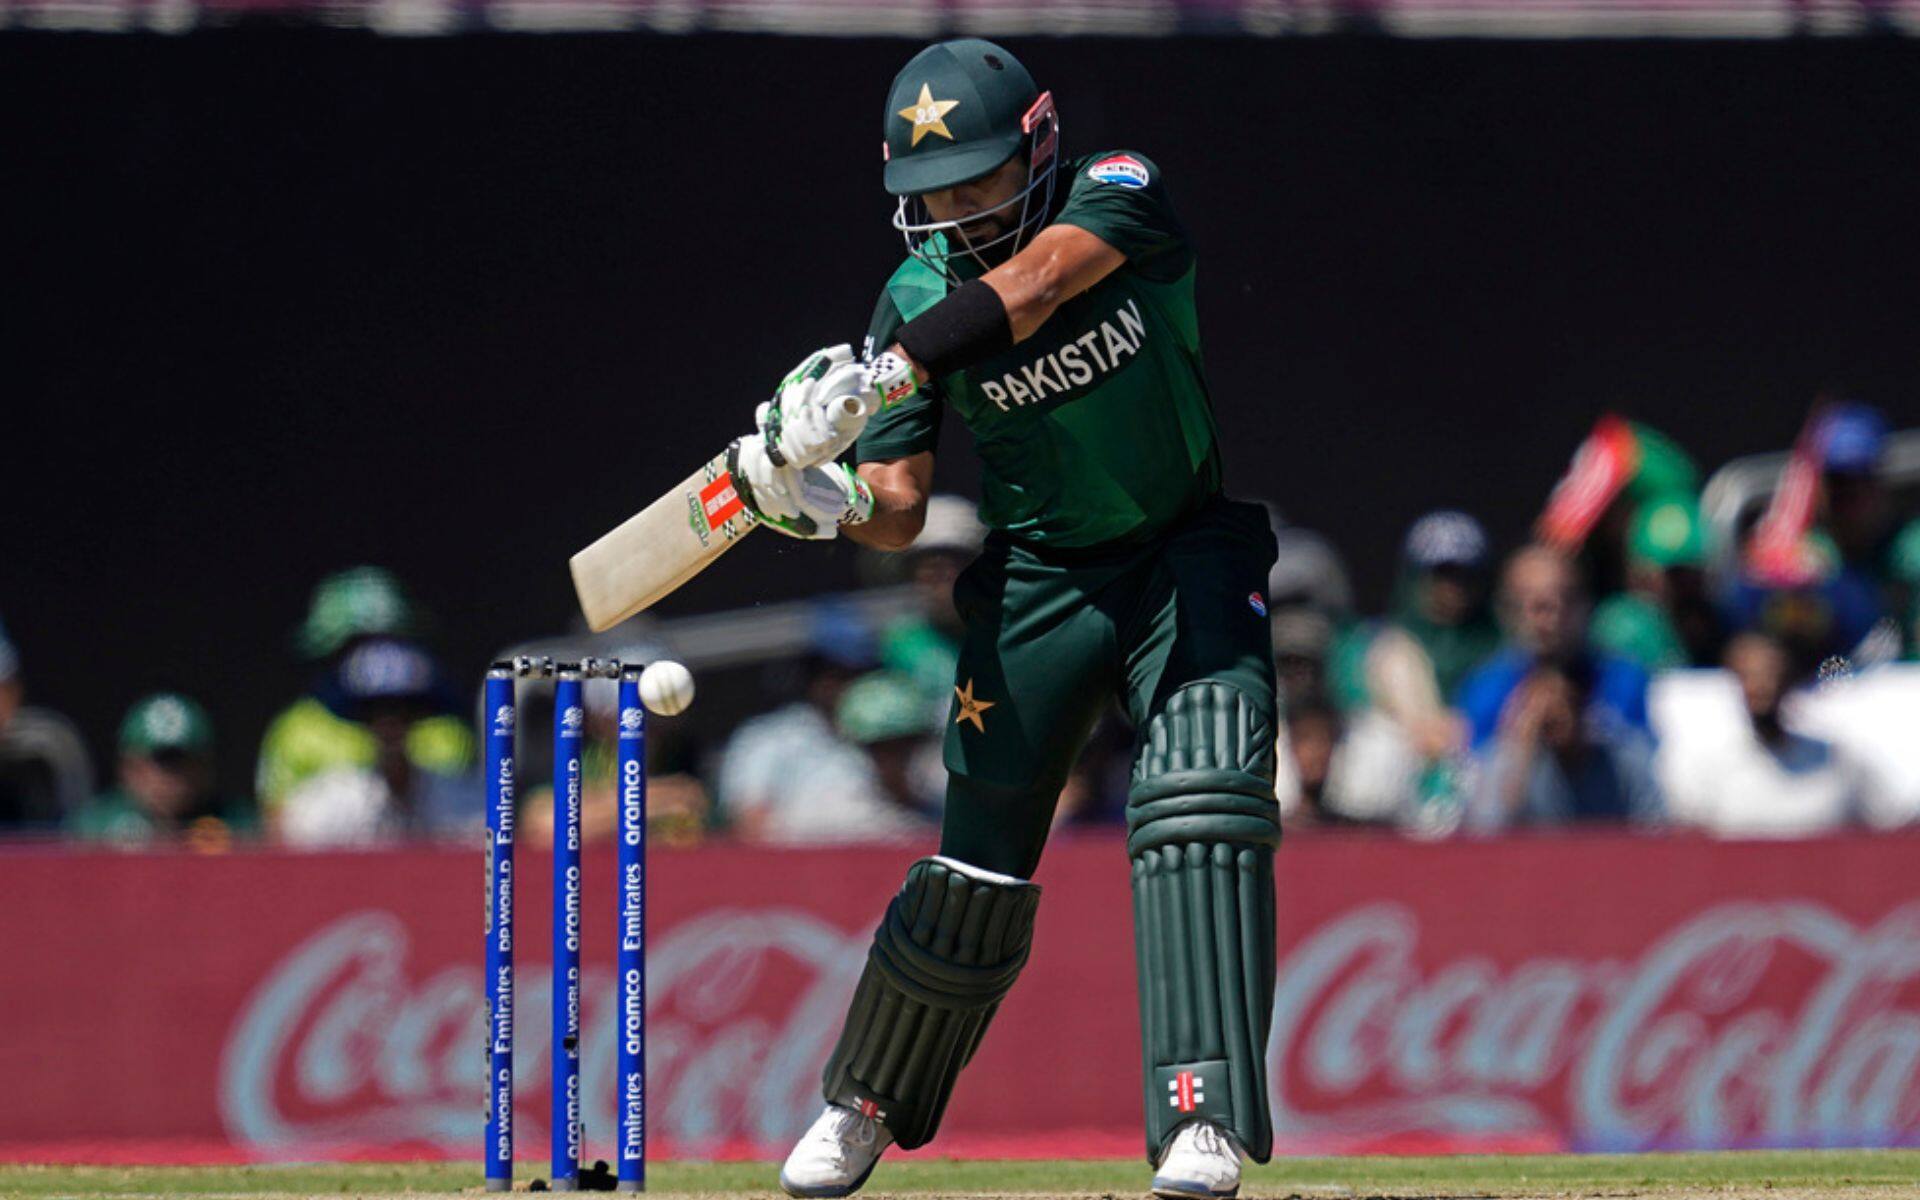 Babar Azam will be important for Pakistan in the match [AP Photos]